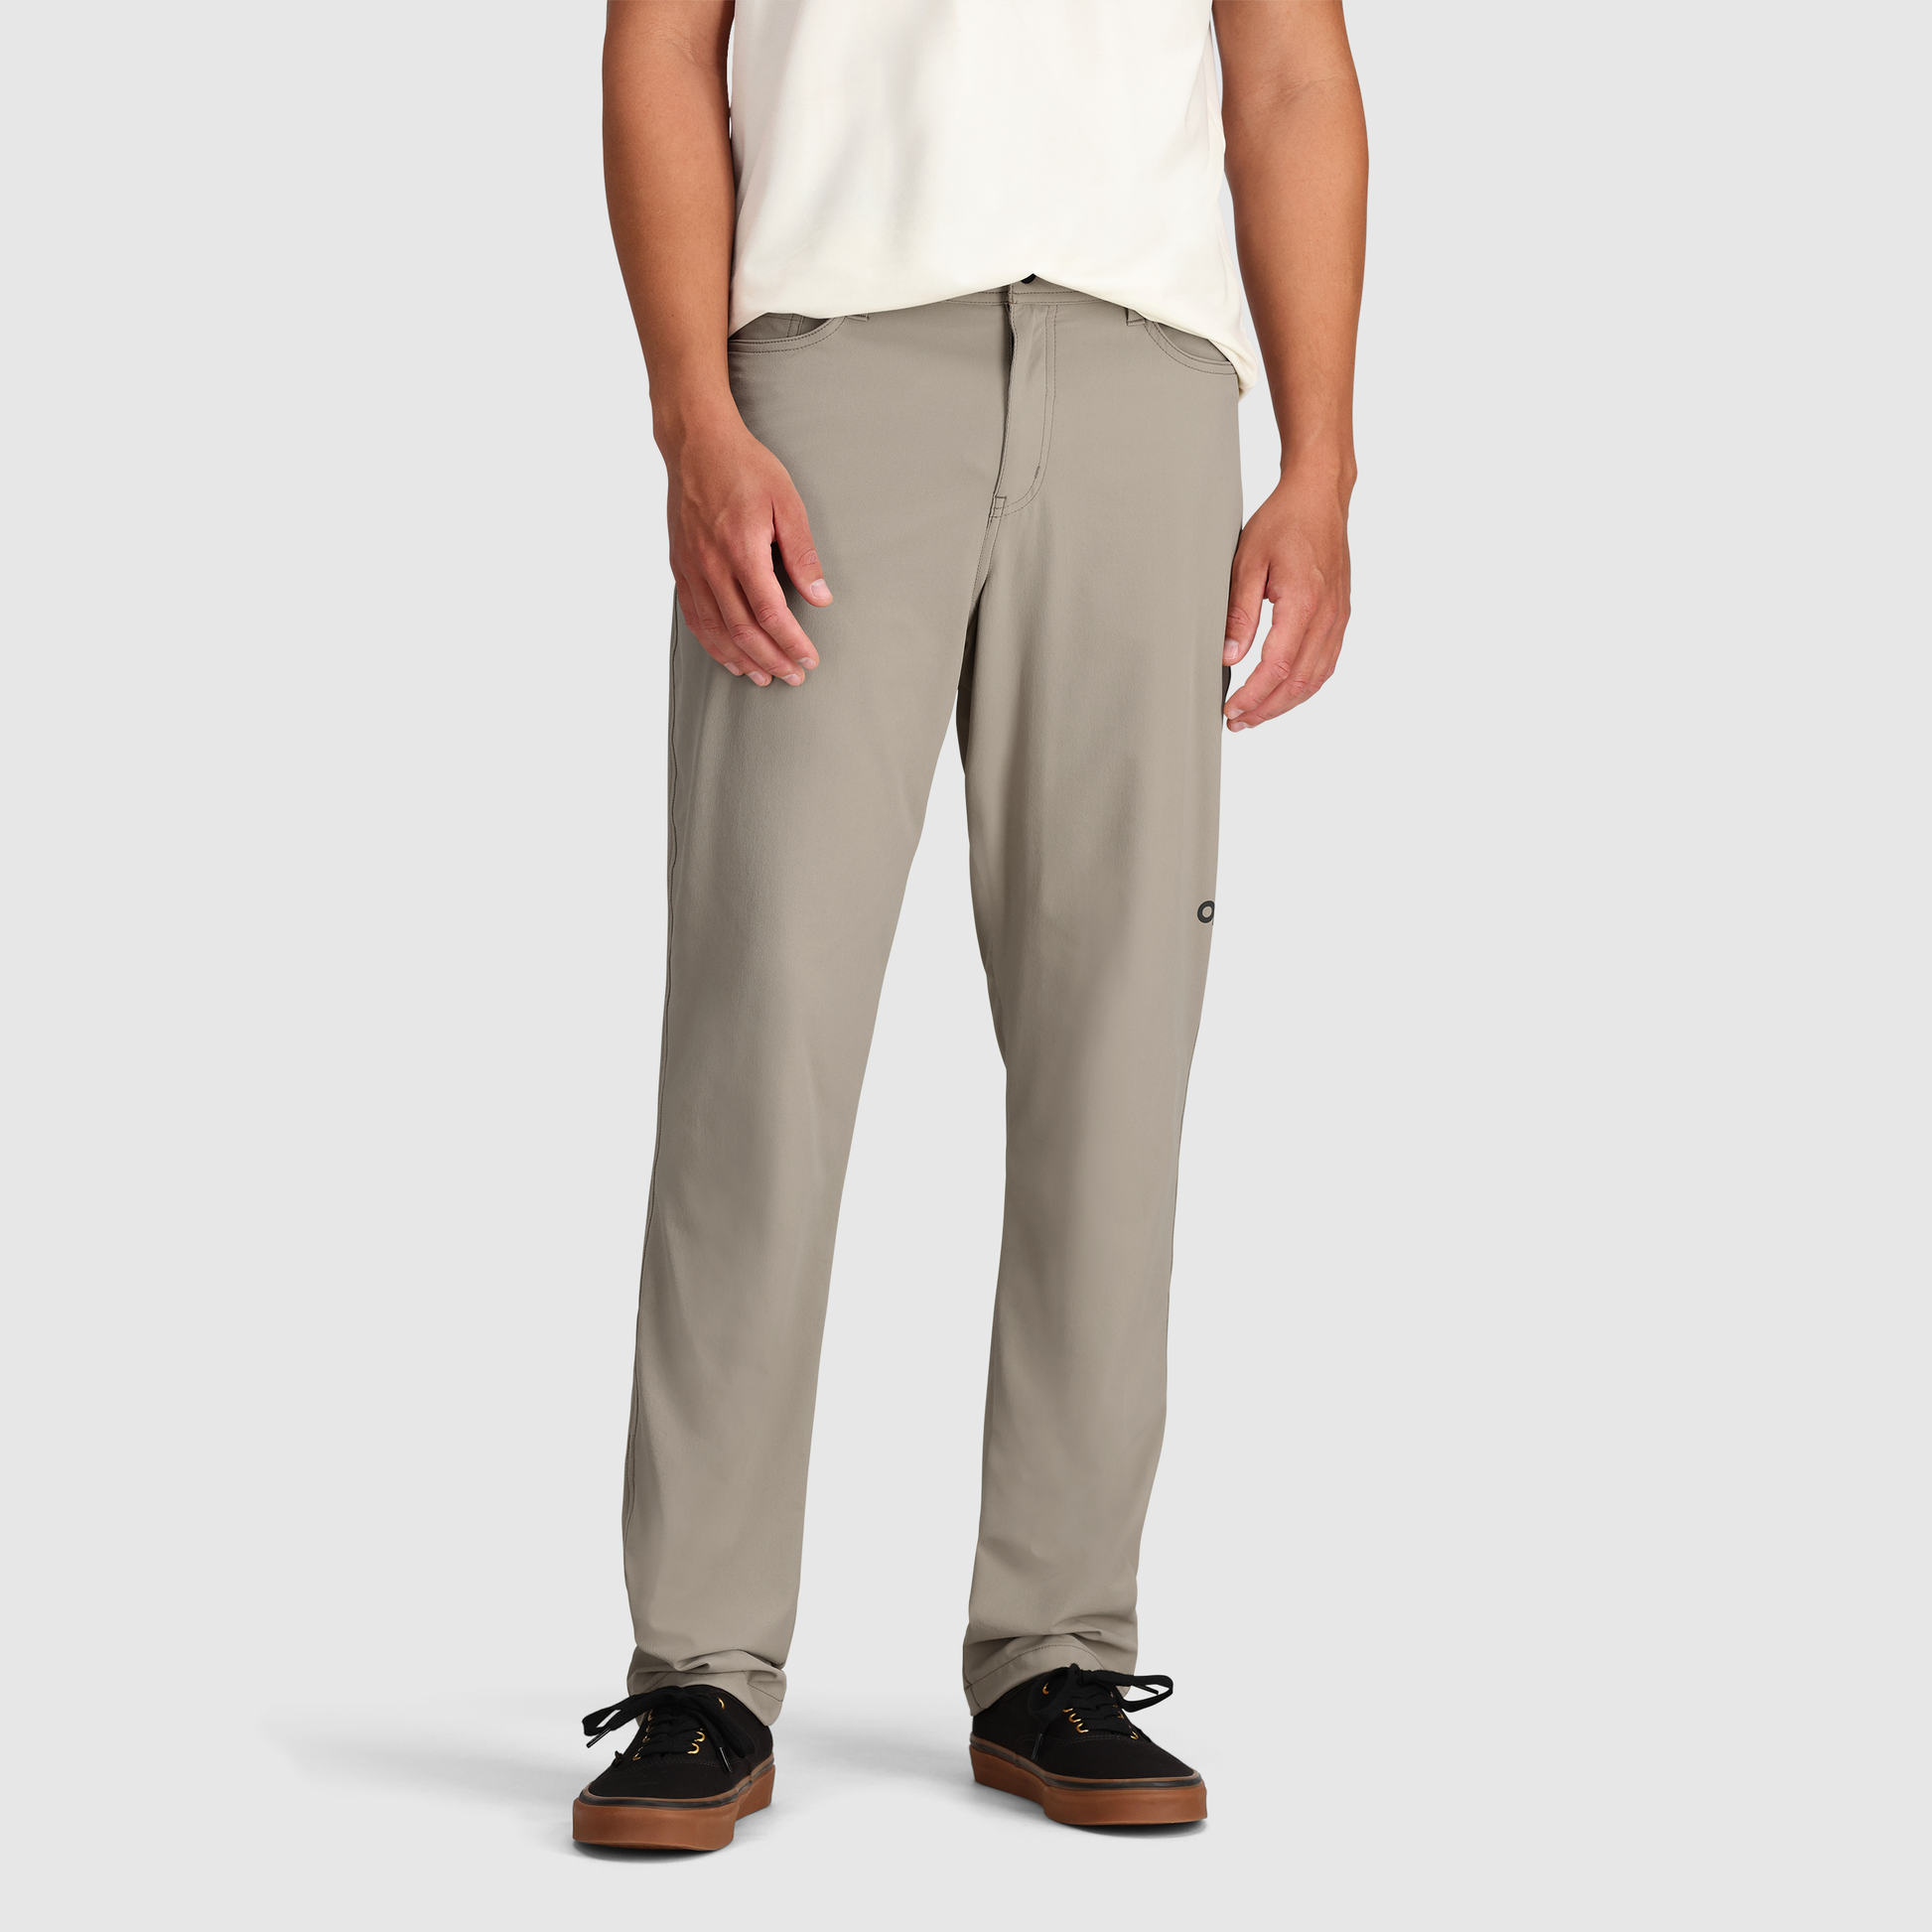 Outdoor Research Ferrosi Transit Pants, 30 Inseam - Mens, FREE SHIPPING  in Canada